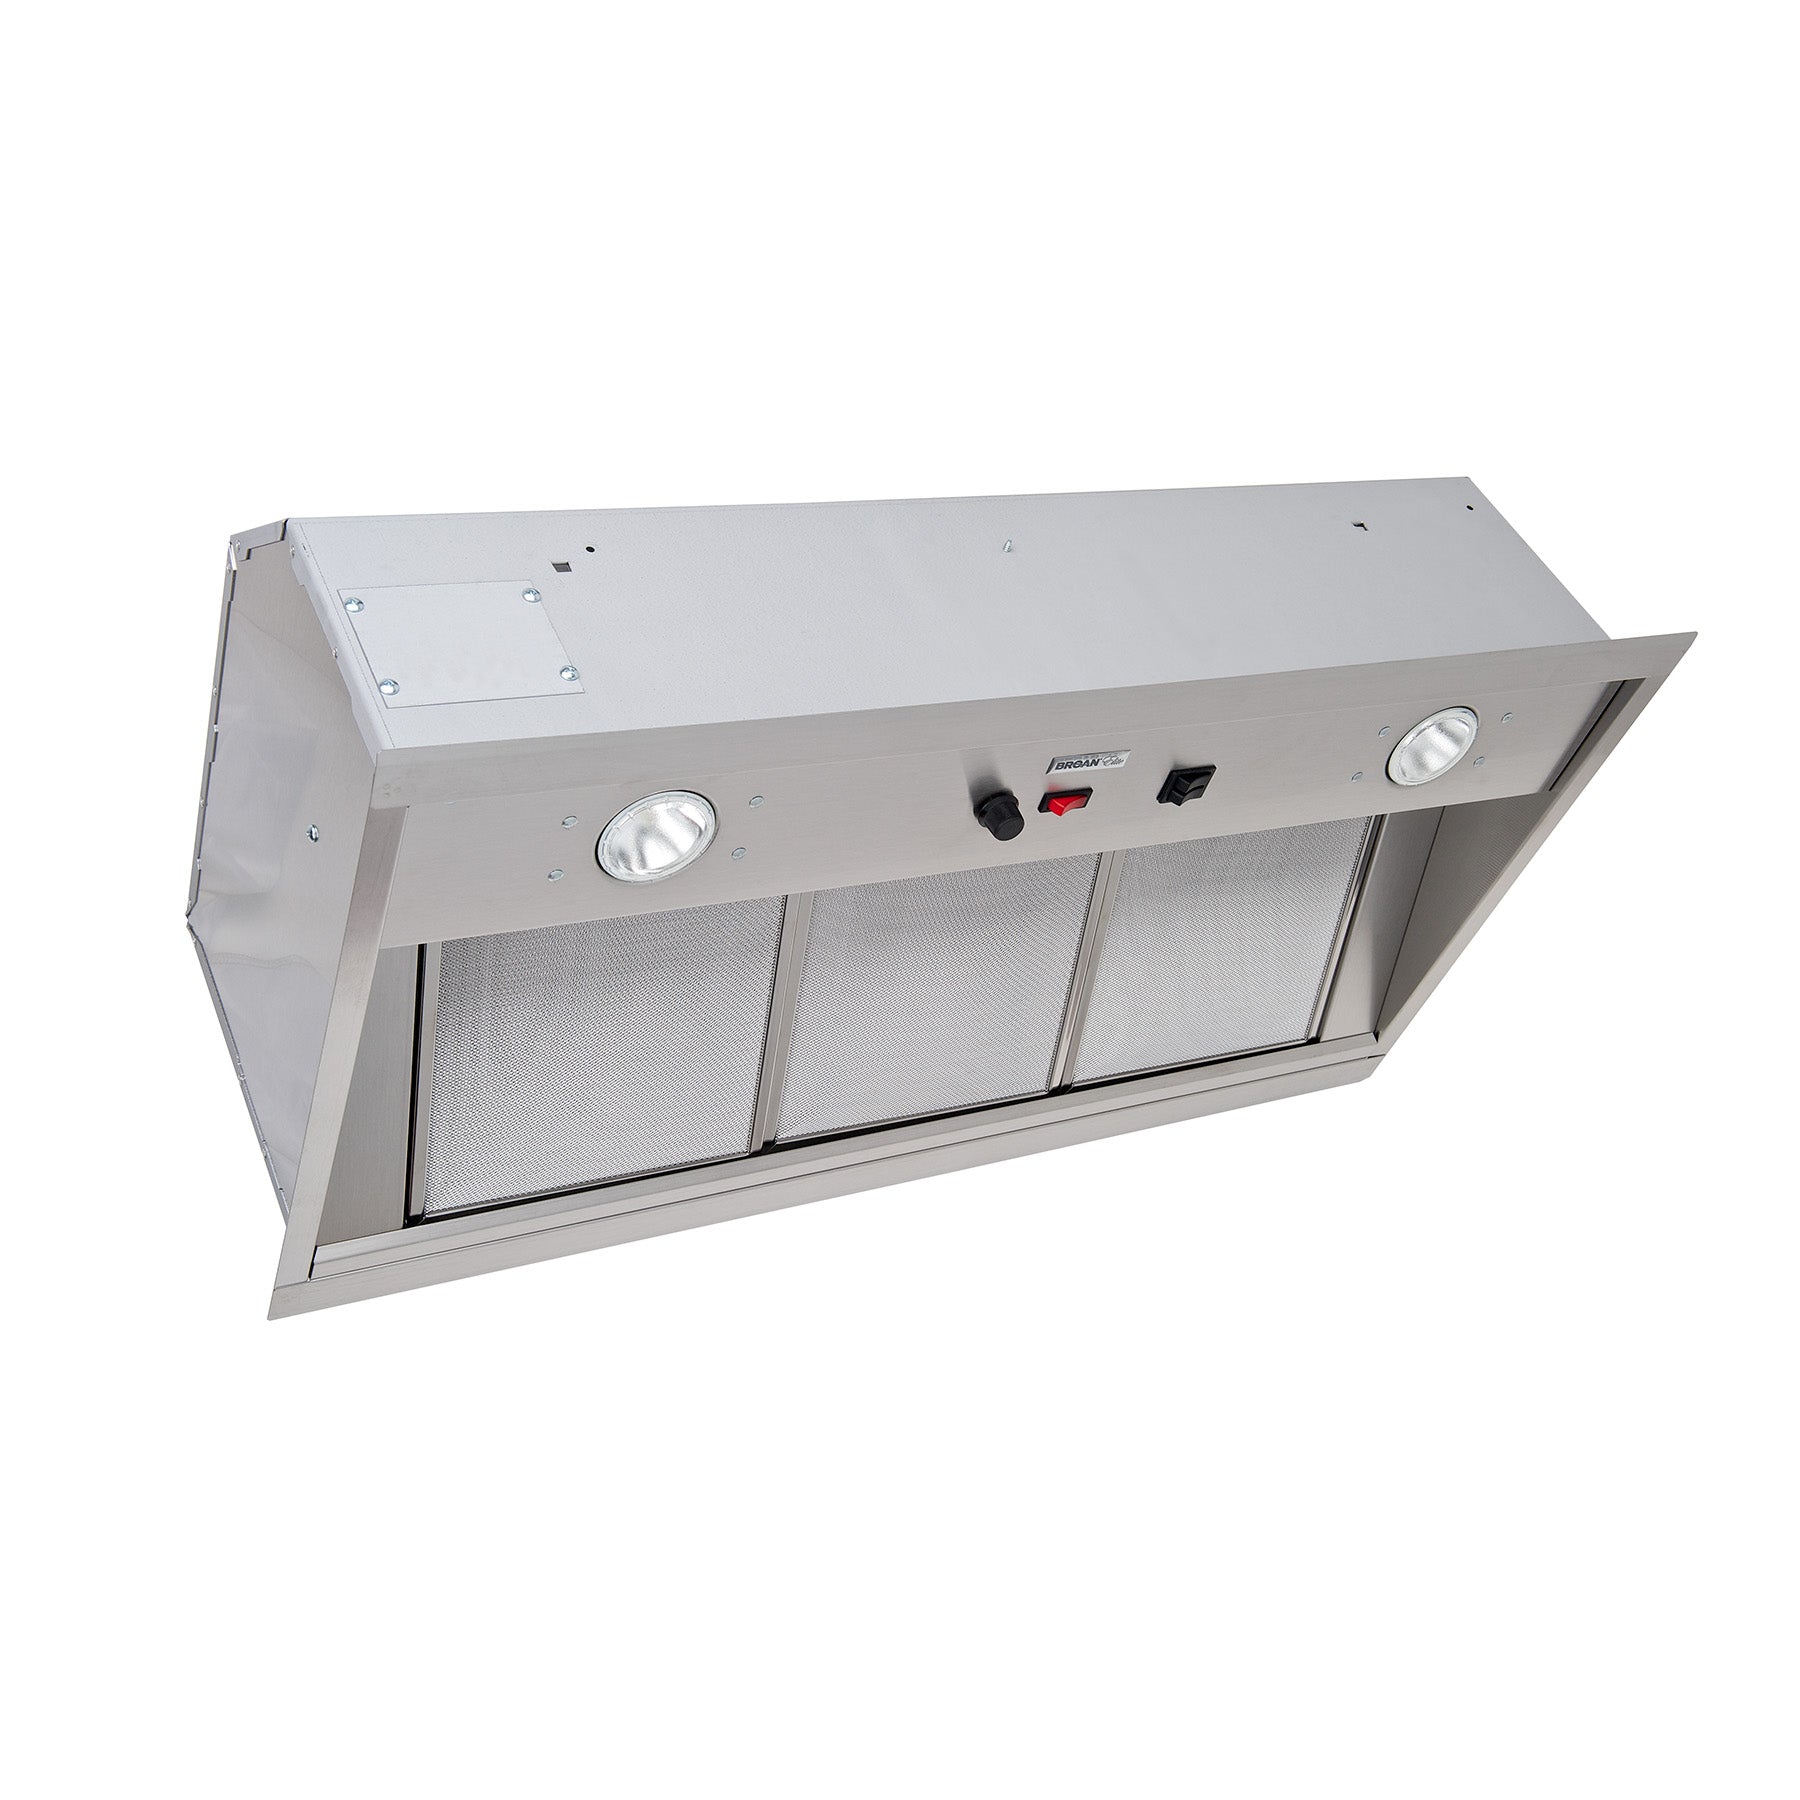 Broan - 45 Inch Blower & Insert Vent in Stainless - RMIP45